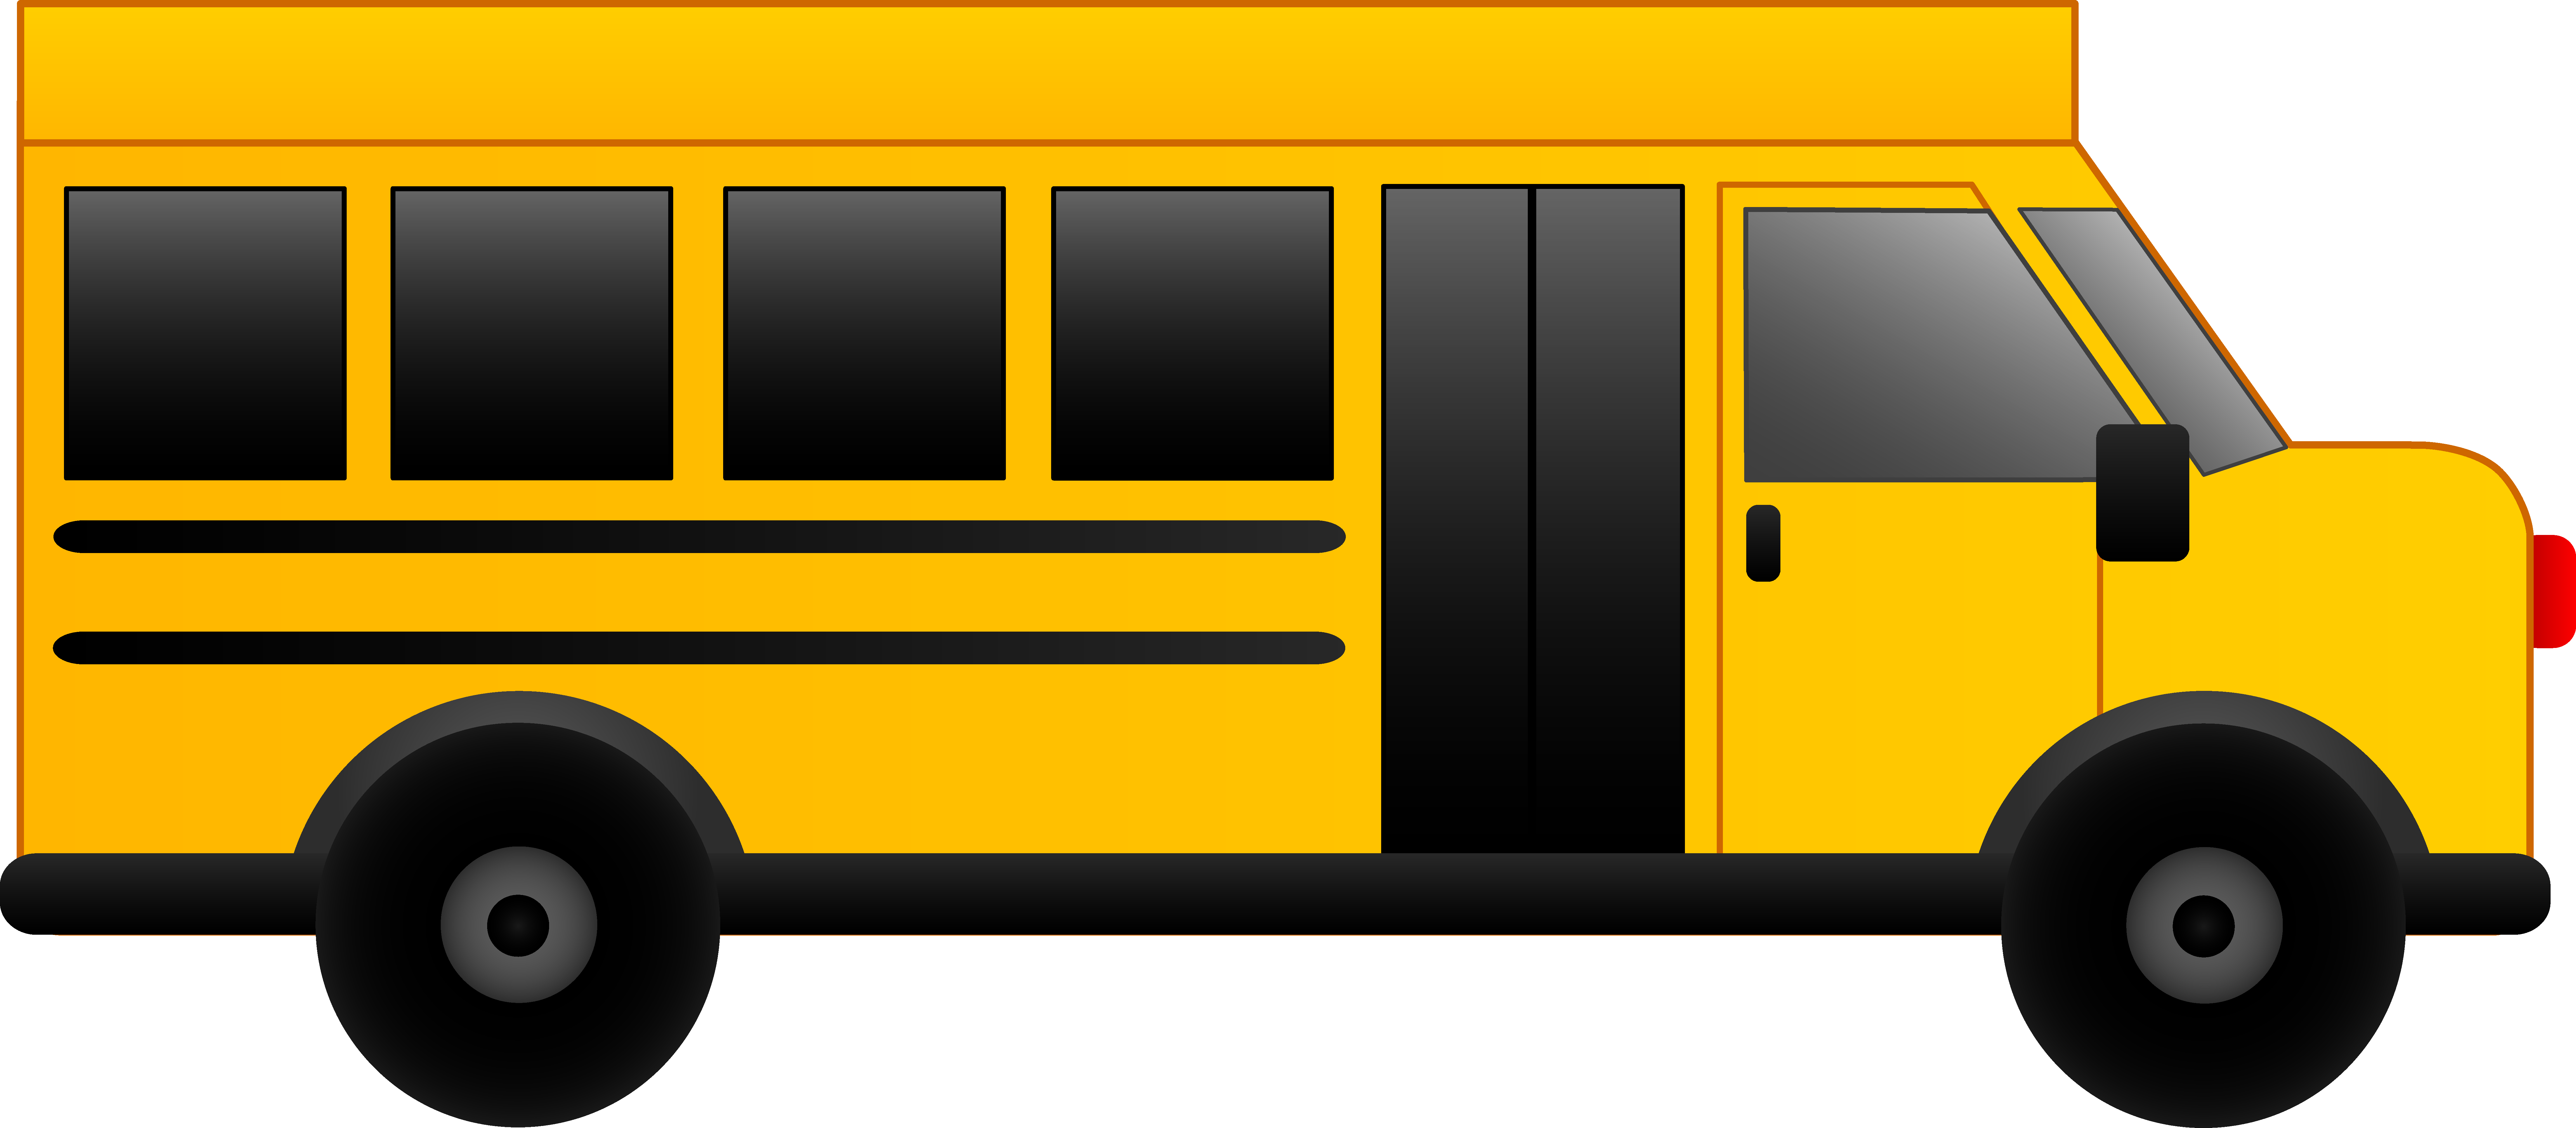 free clipart of school buses - photo #19